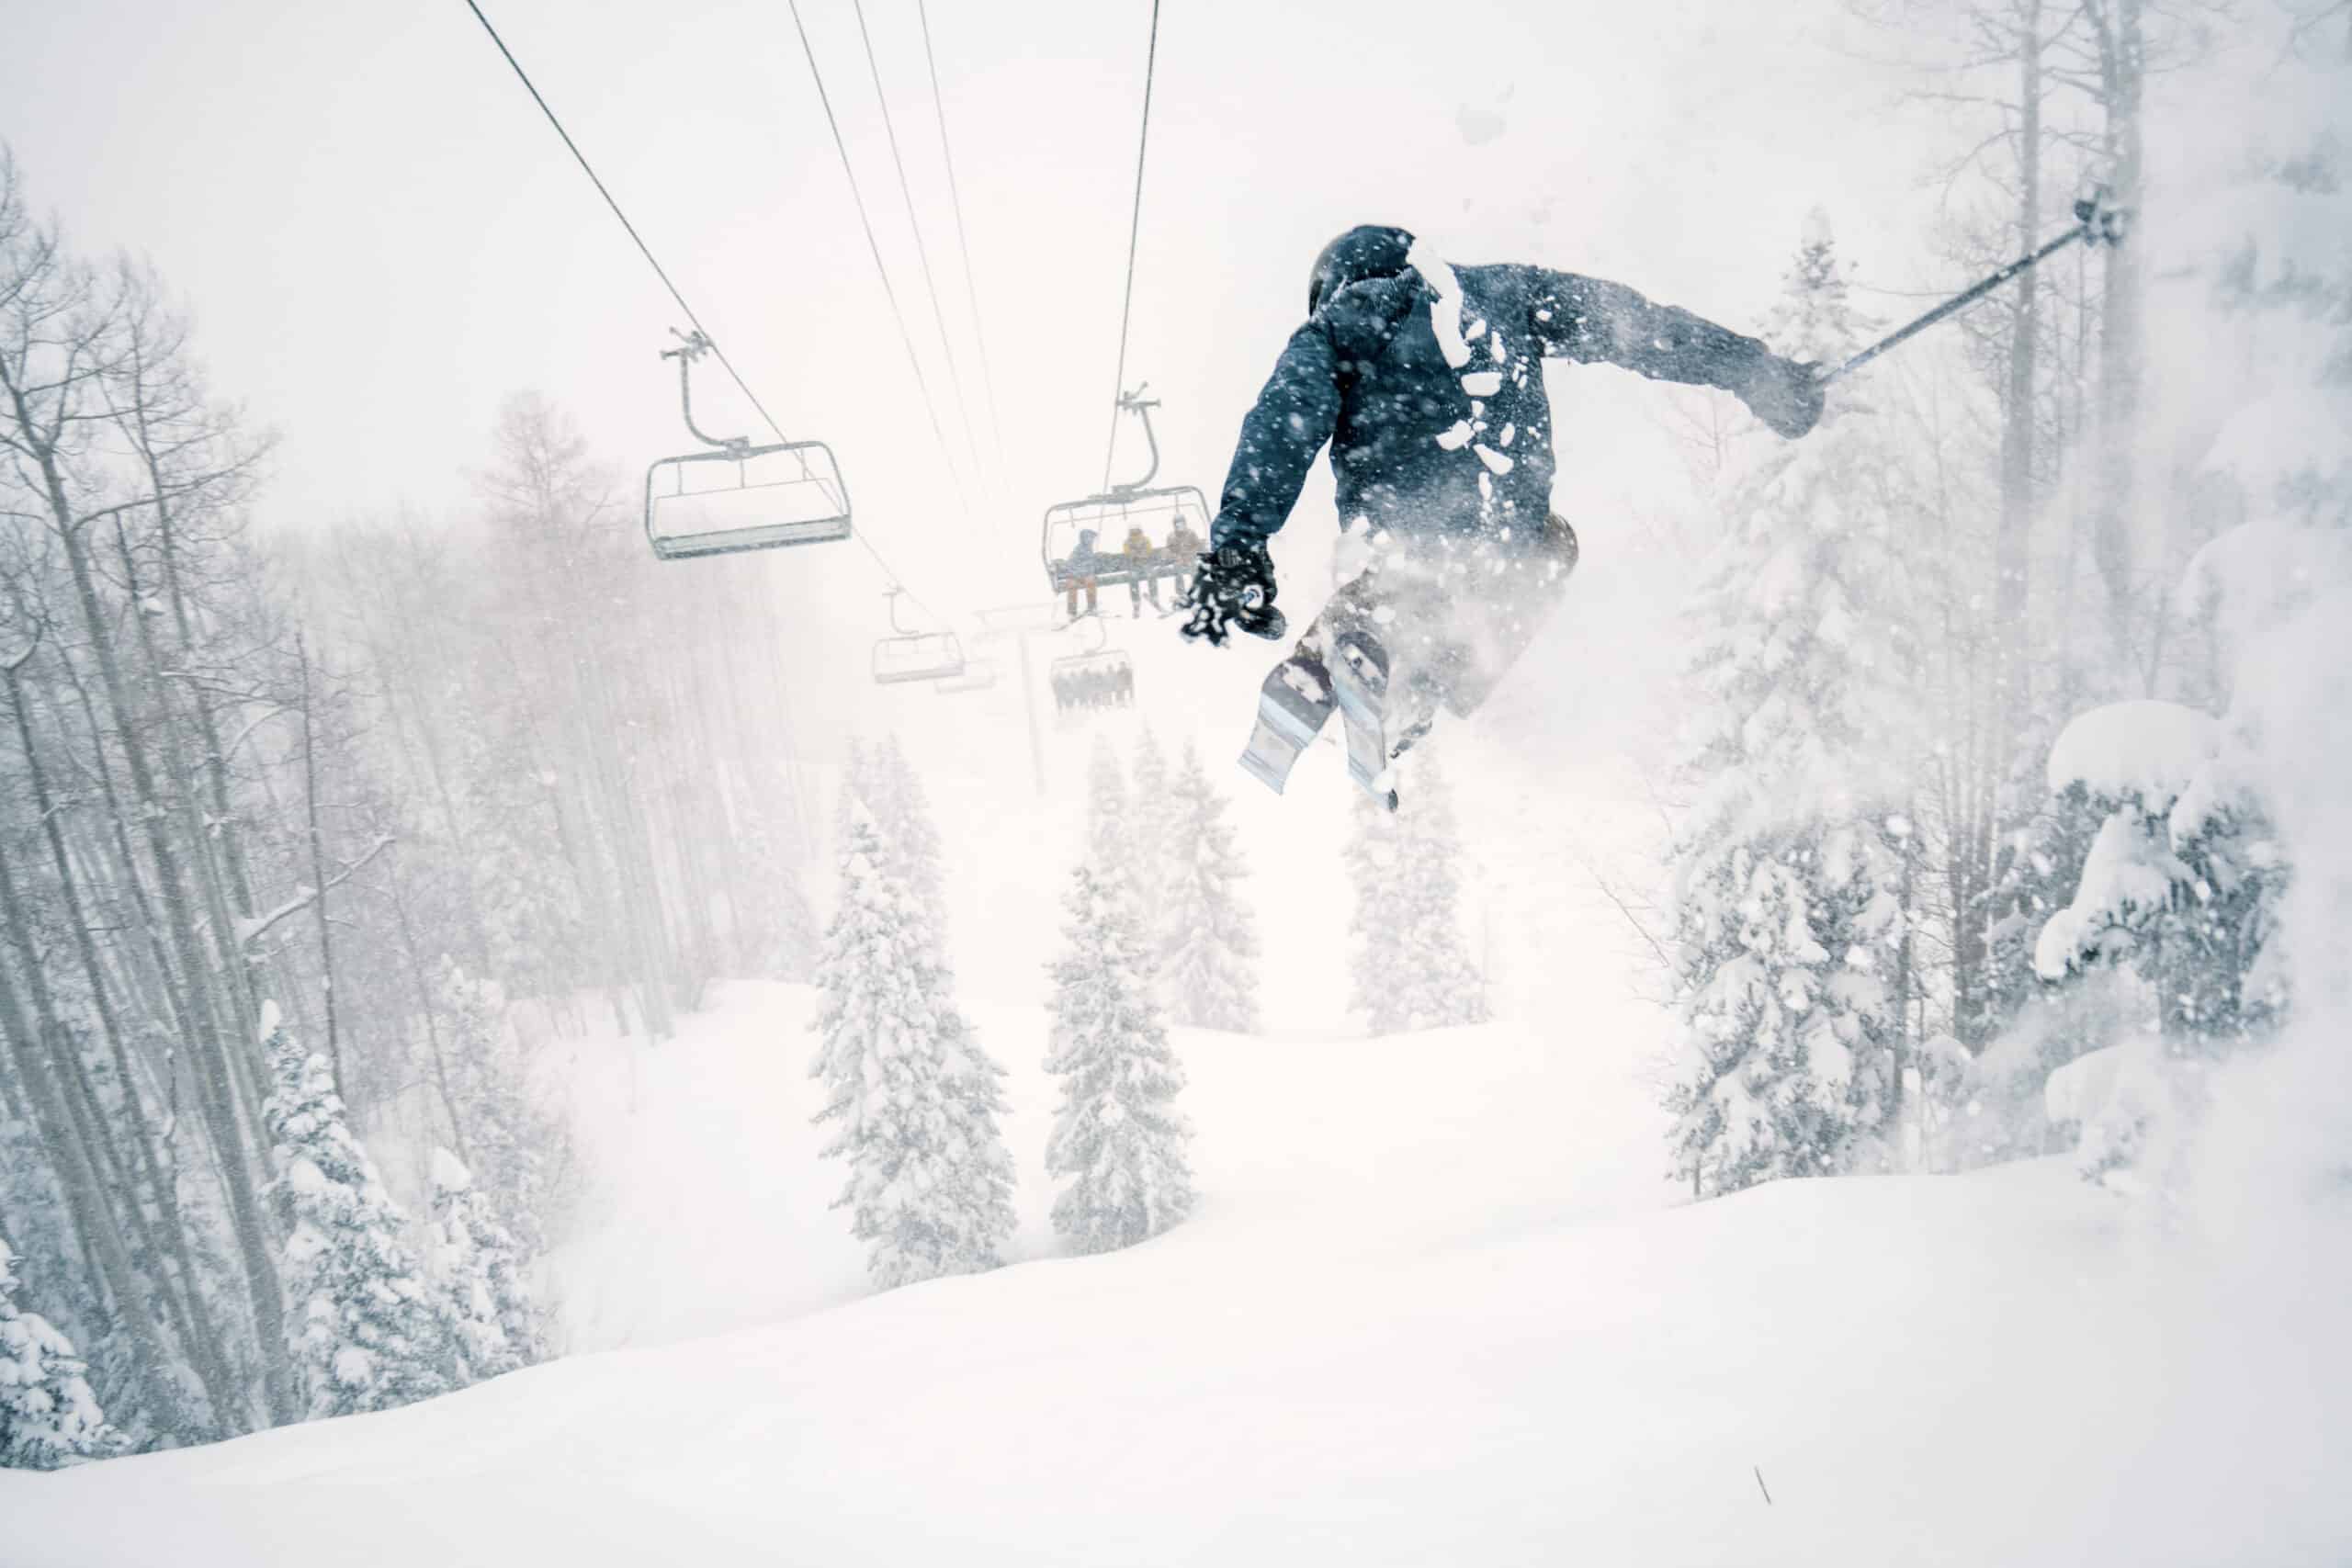 Skier catching air on a powder day